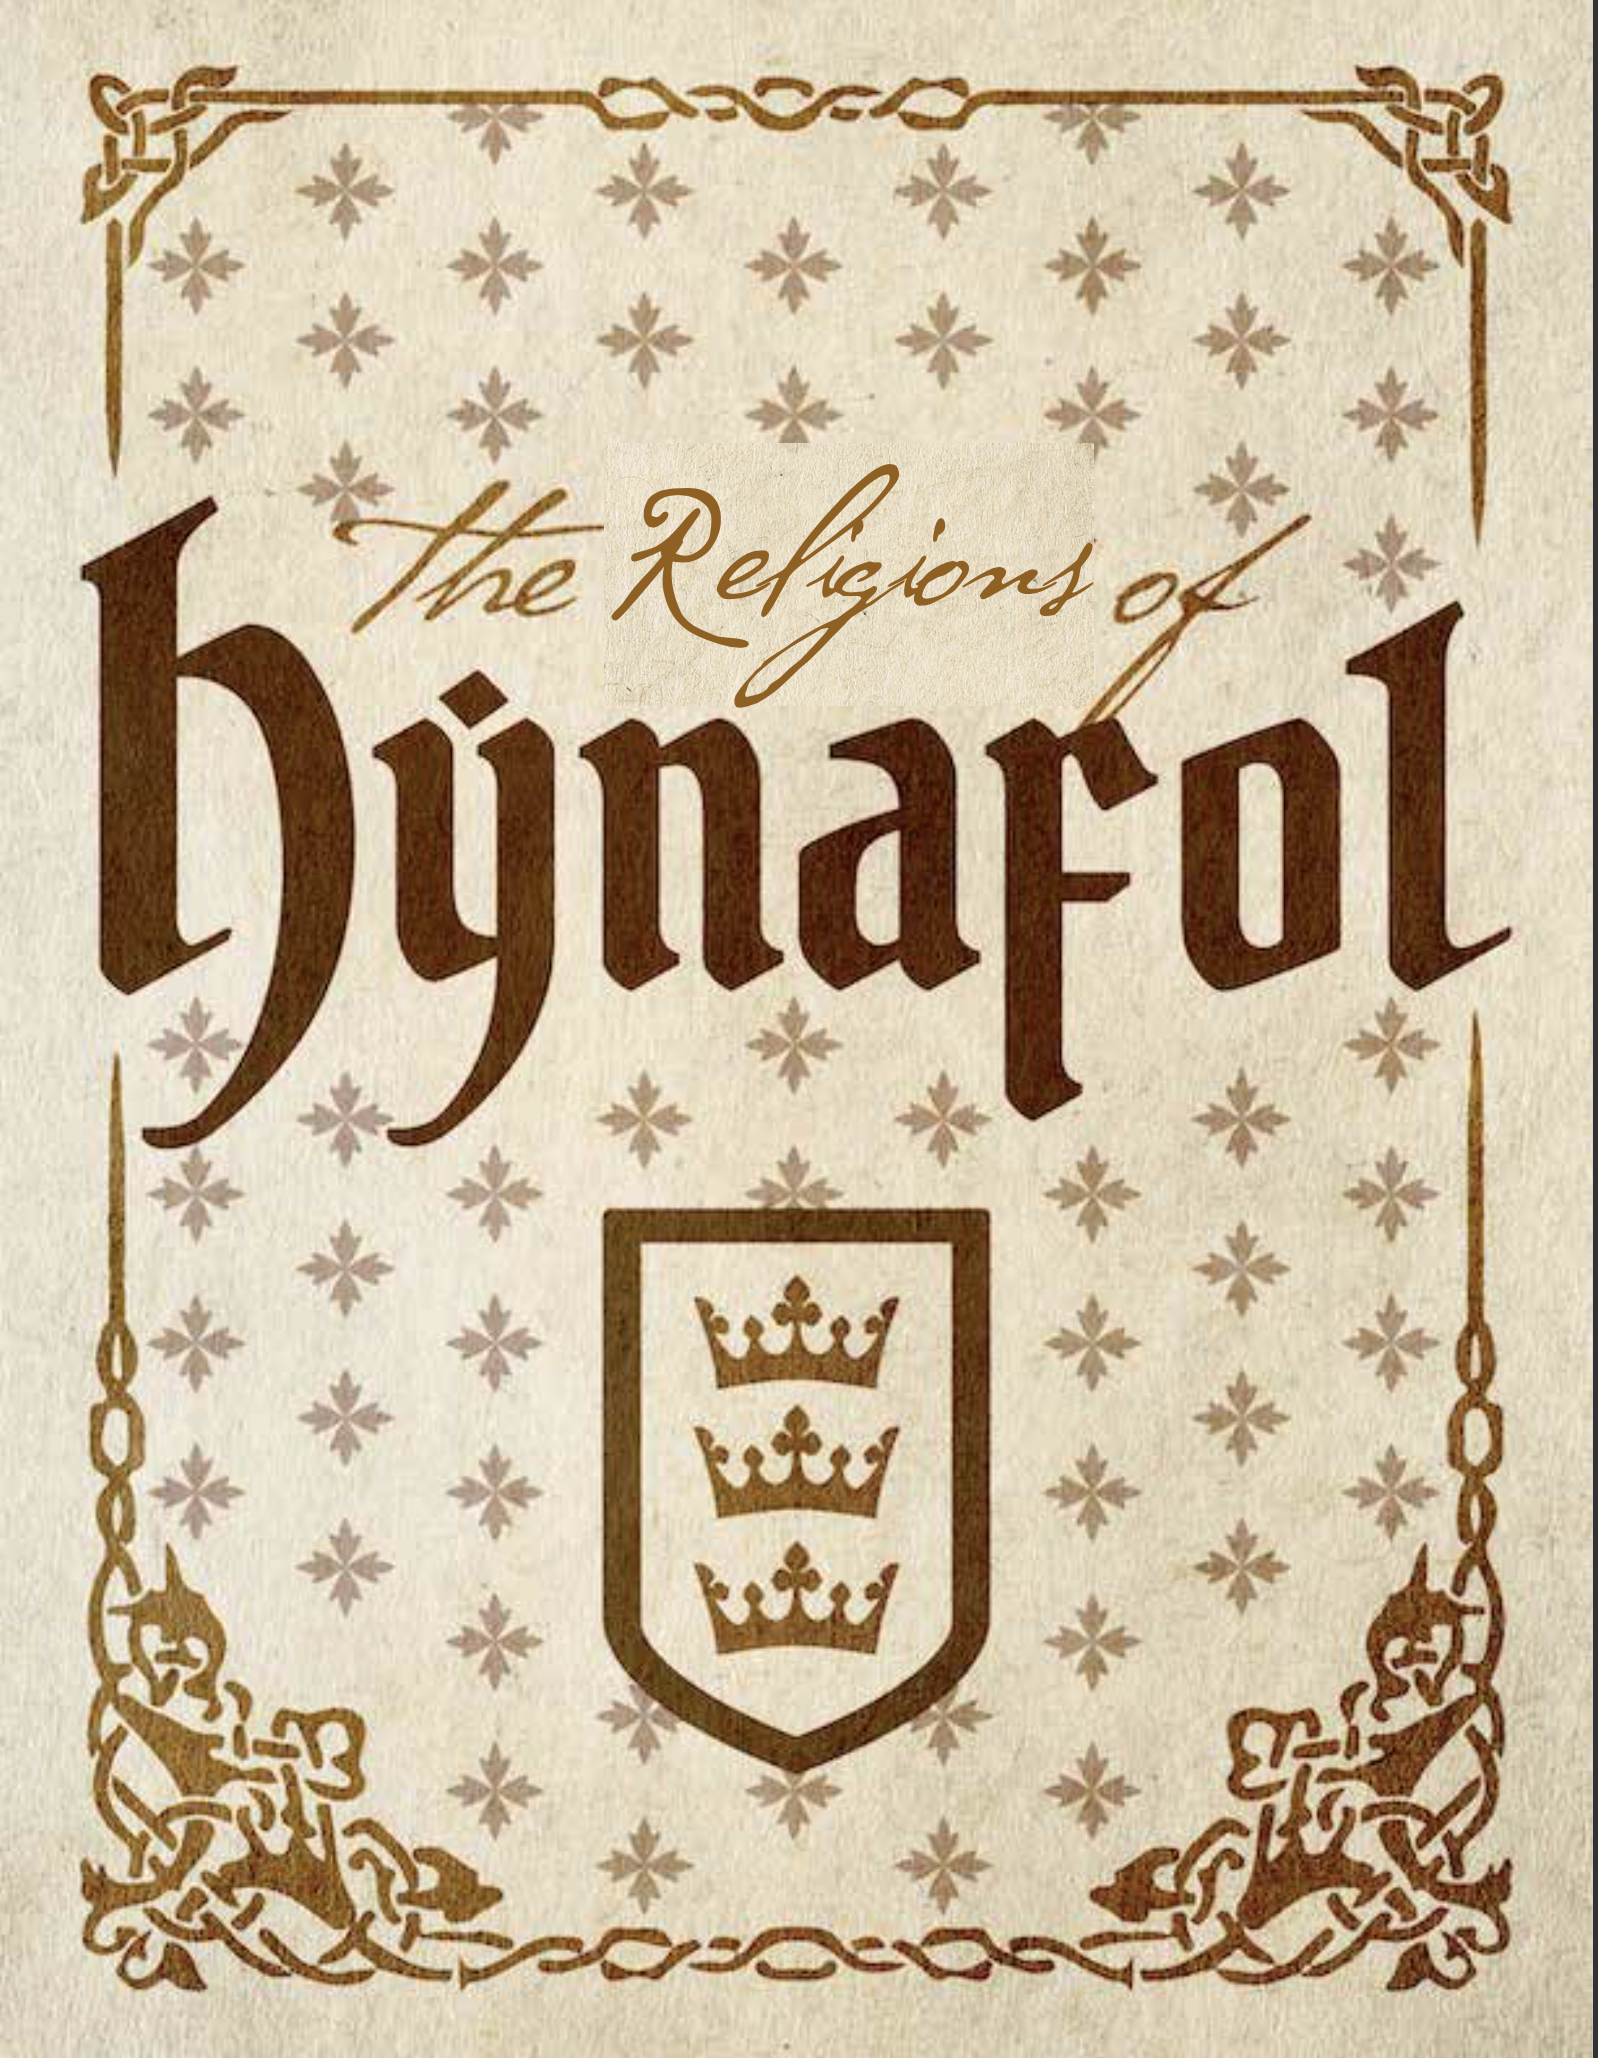 The Guilds of Hynafol